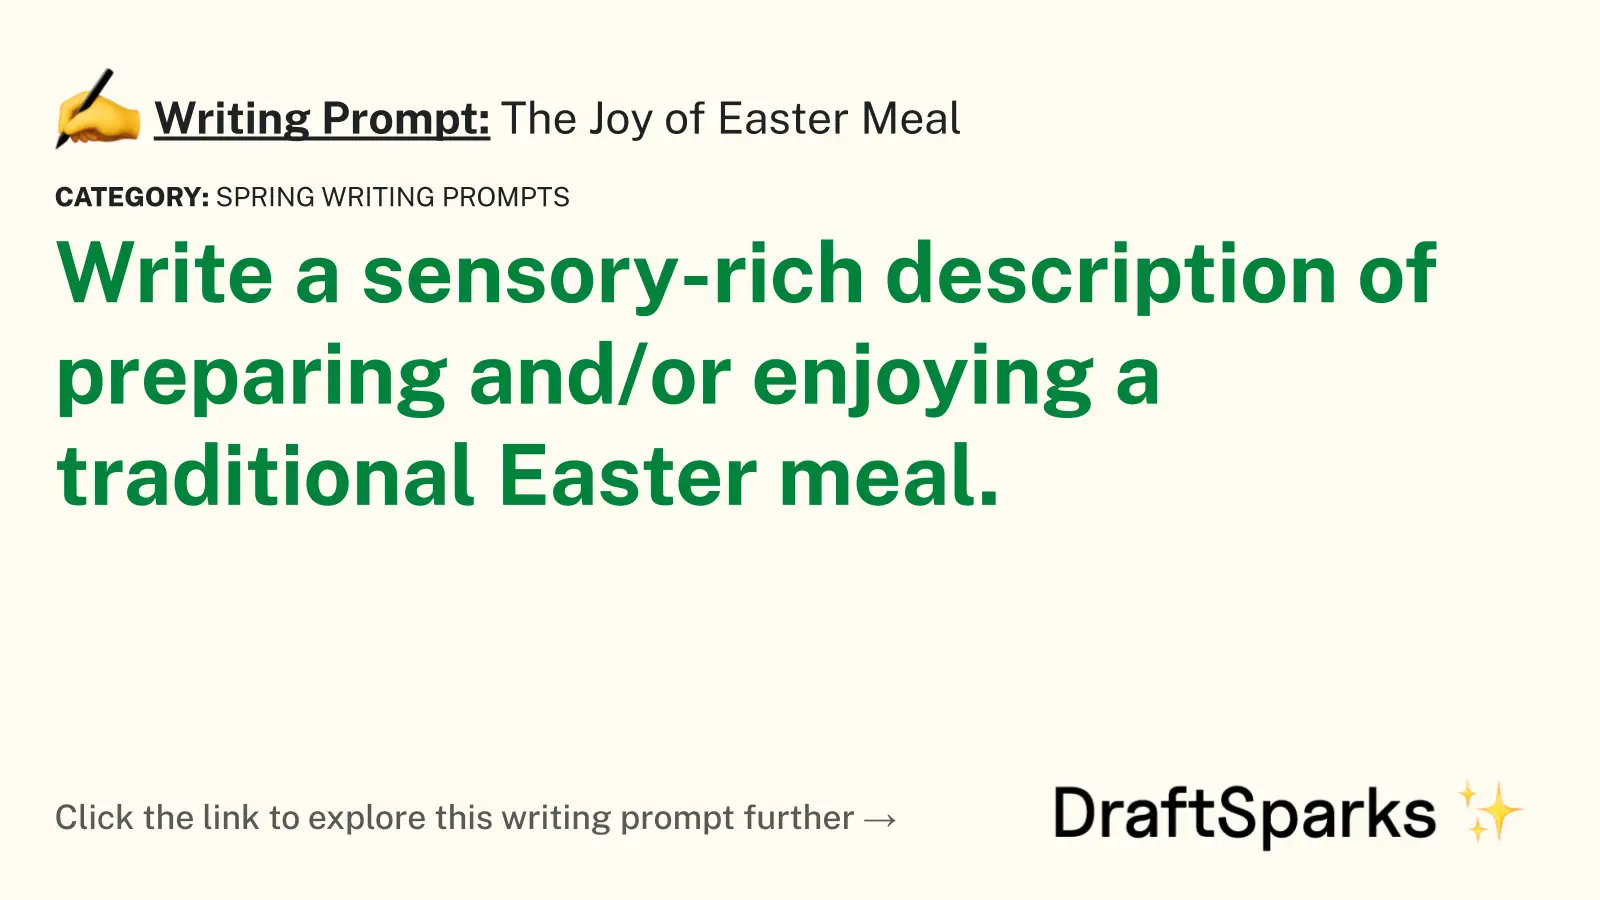 The Joy of Easter Meal